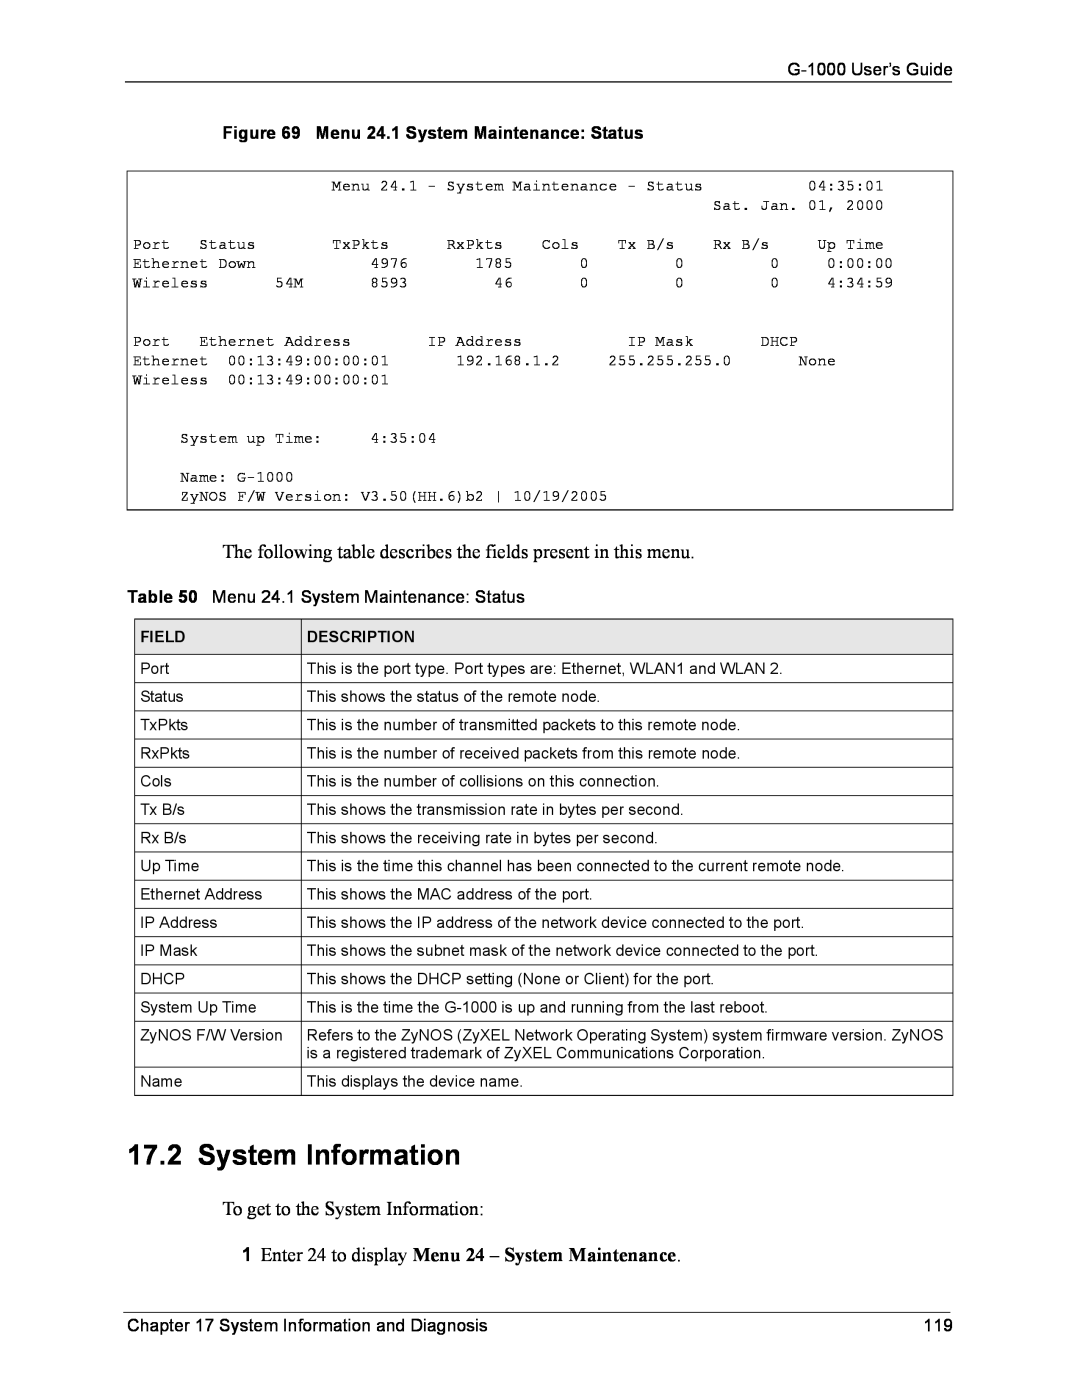 ZyXEL Communications System Information, Enter 24 to display Menu 24 - System Maintenance, G-1000 User’s Guide, Field 